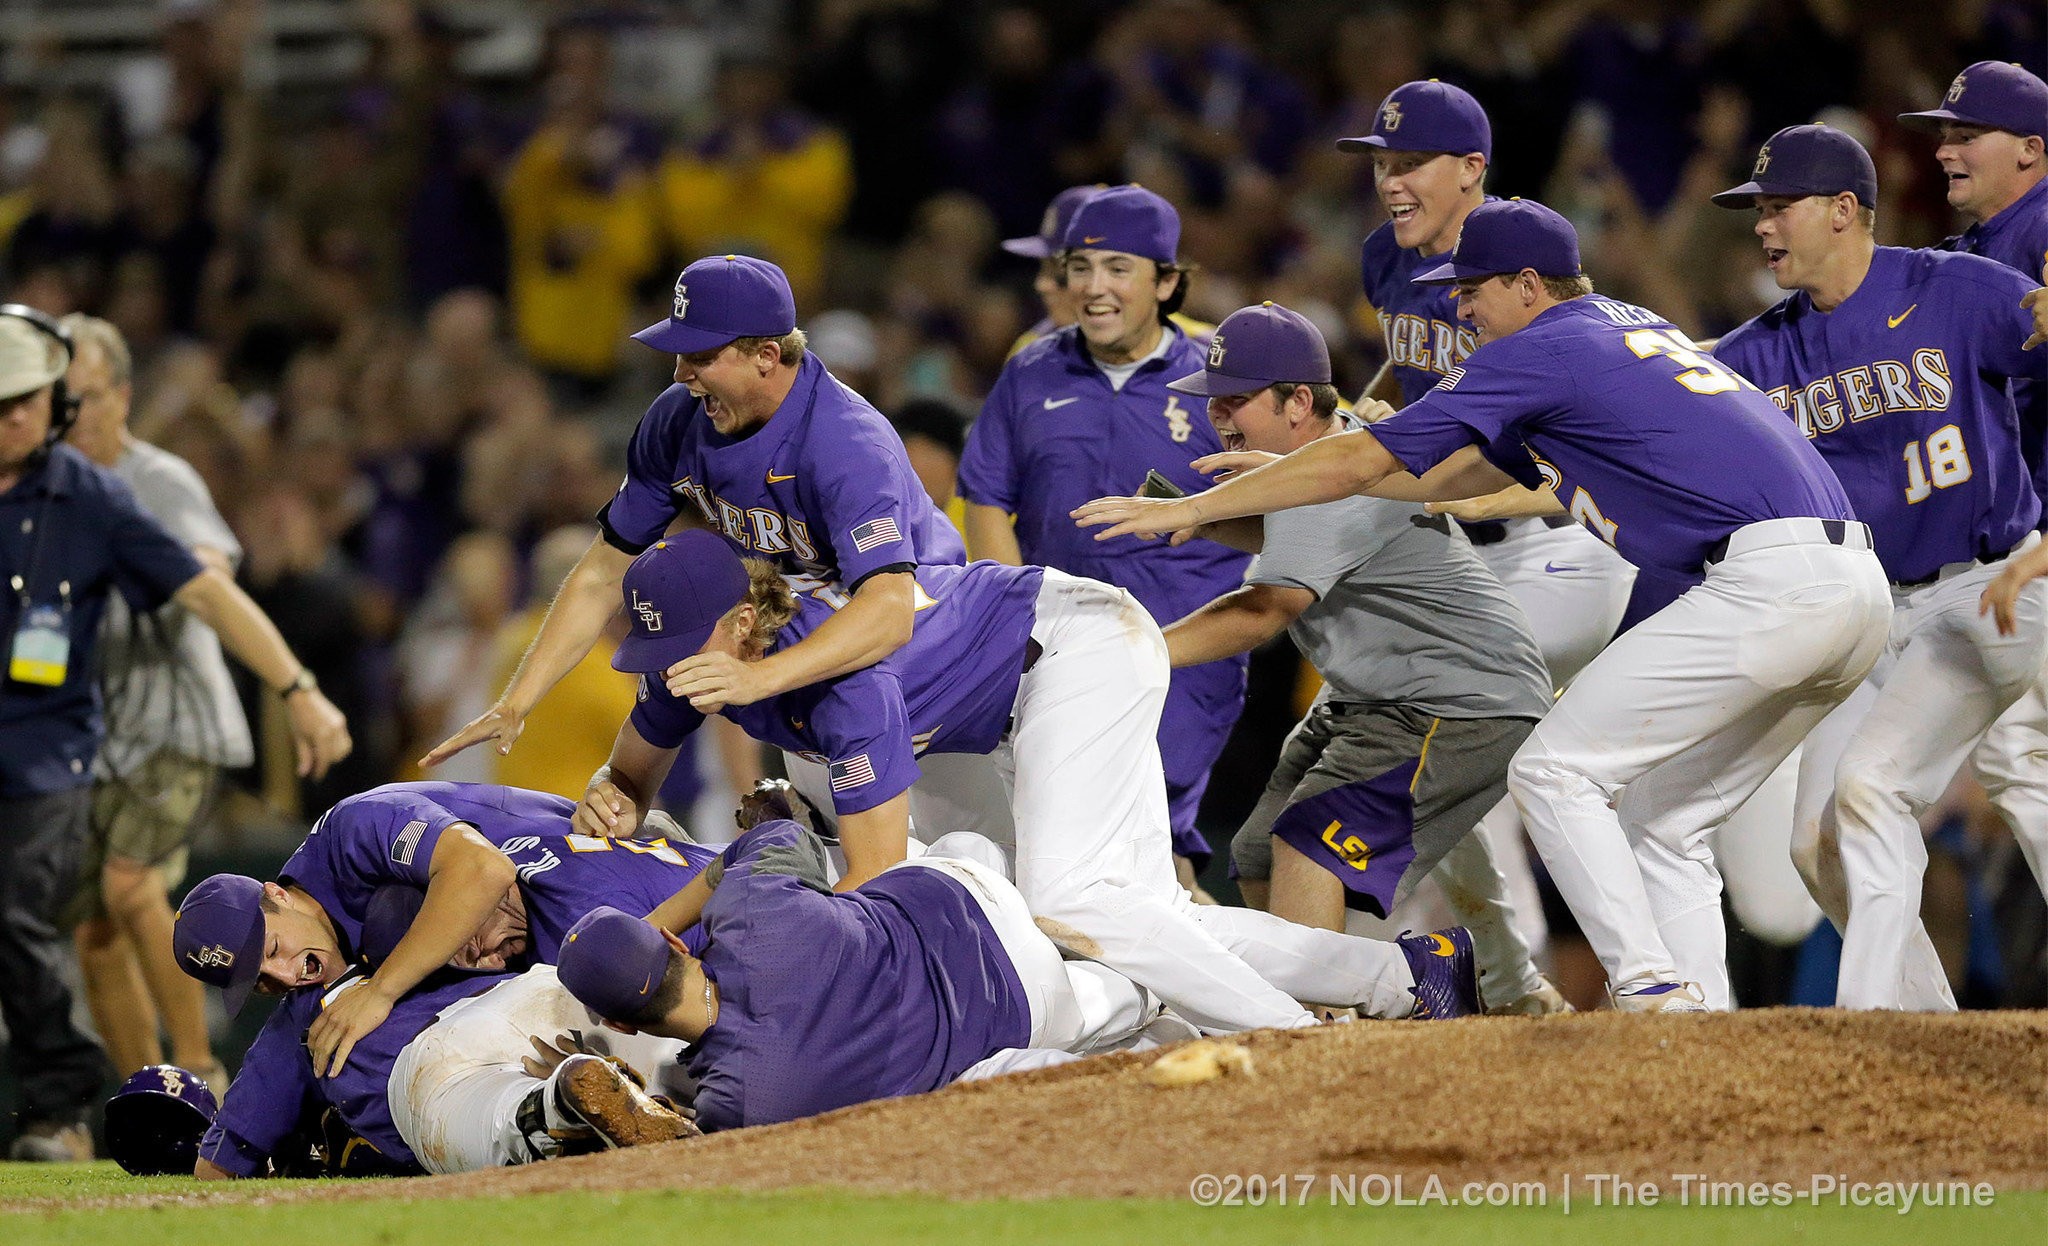 Who are 7 of the 8 College World Series teams joining LSU in Omaha?